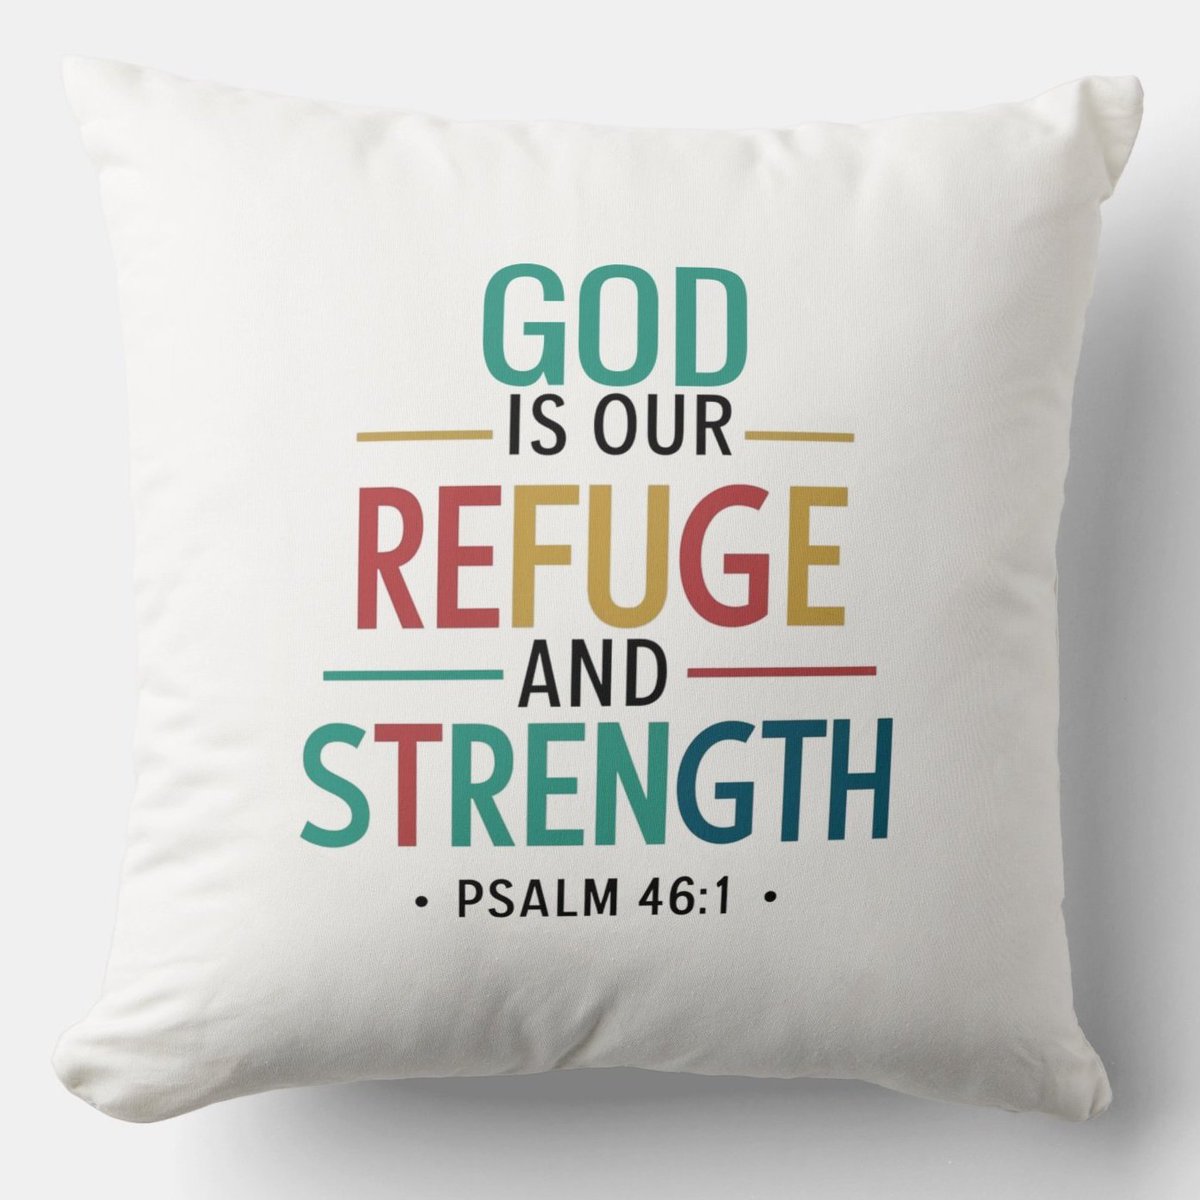 God Is Our Refuge & Strength Cushion zazzle.com/god_is_our_ref… Throw #Pillow #Blessing #JesusChrist #JesusSaves #Jesus #christian #spiritual #Homedecoration #uniquegift #giftideas #MothersDayGifts #giftformom #giftidea #HolySpirit #pillows #giftshop #giftsforher #giftsformom #hope